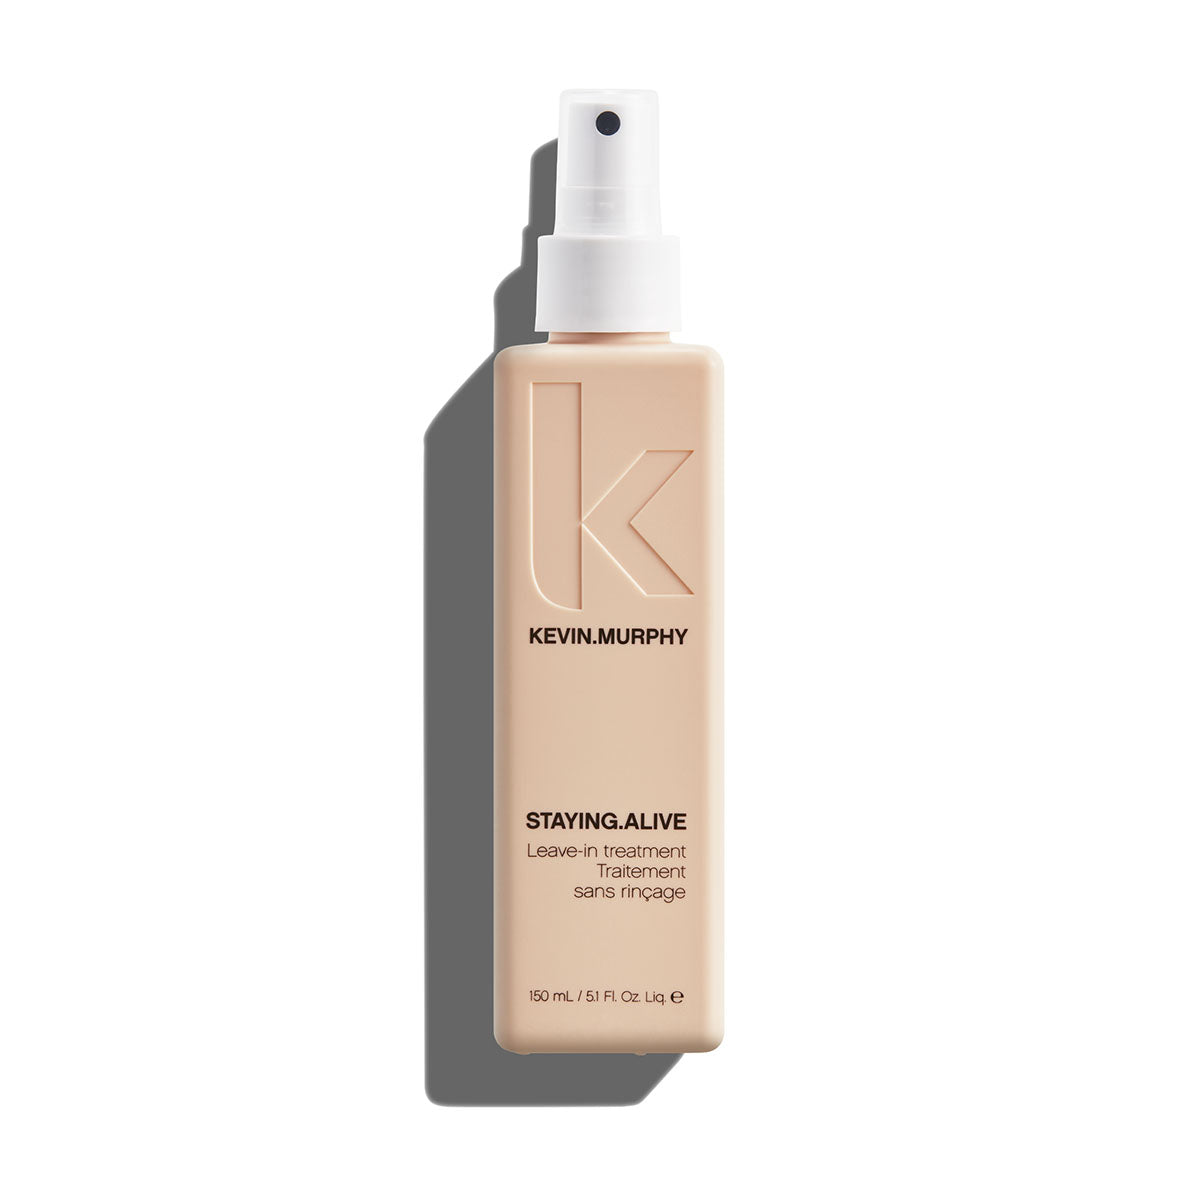 KEVIN.MURPHY Staying Alive 150ml